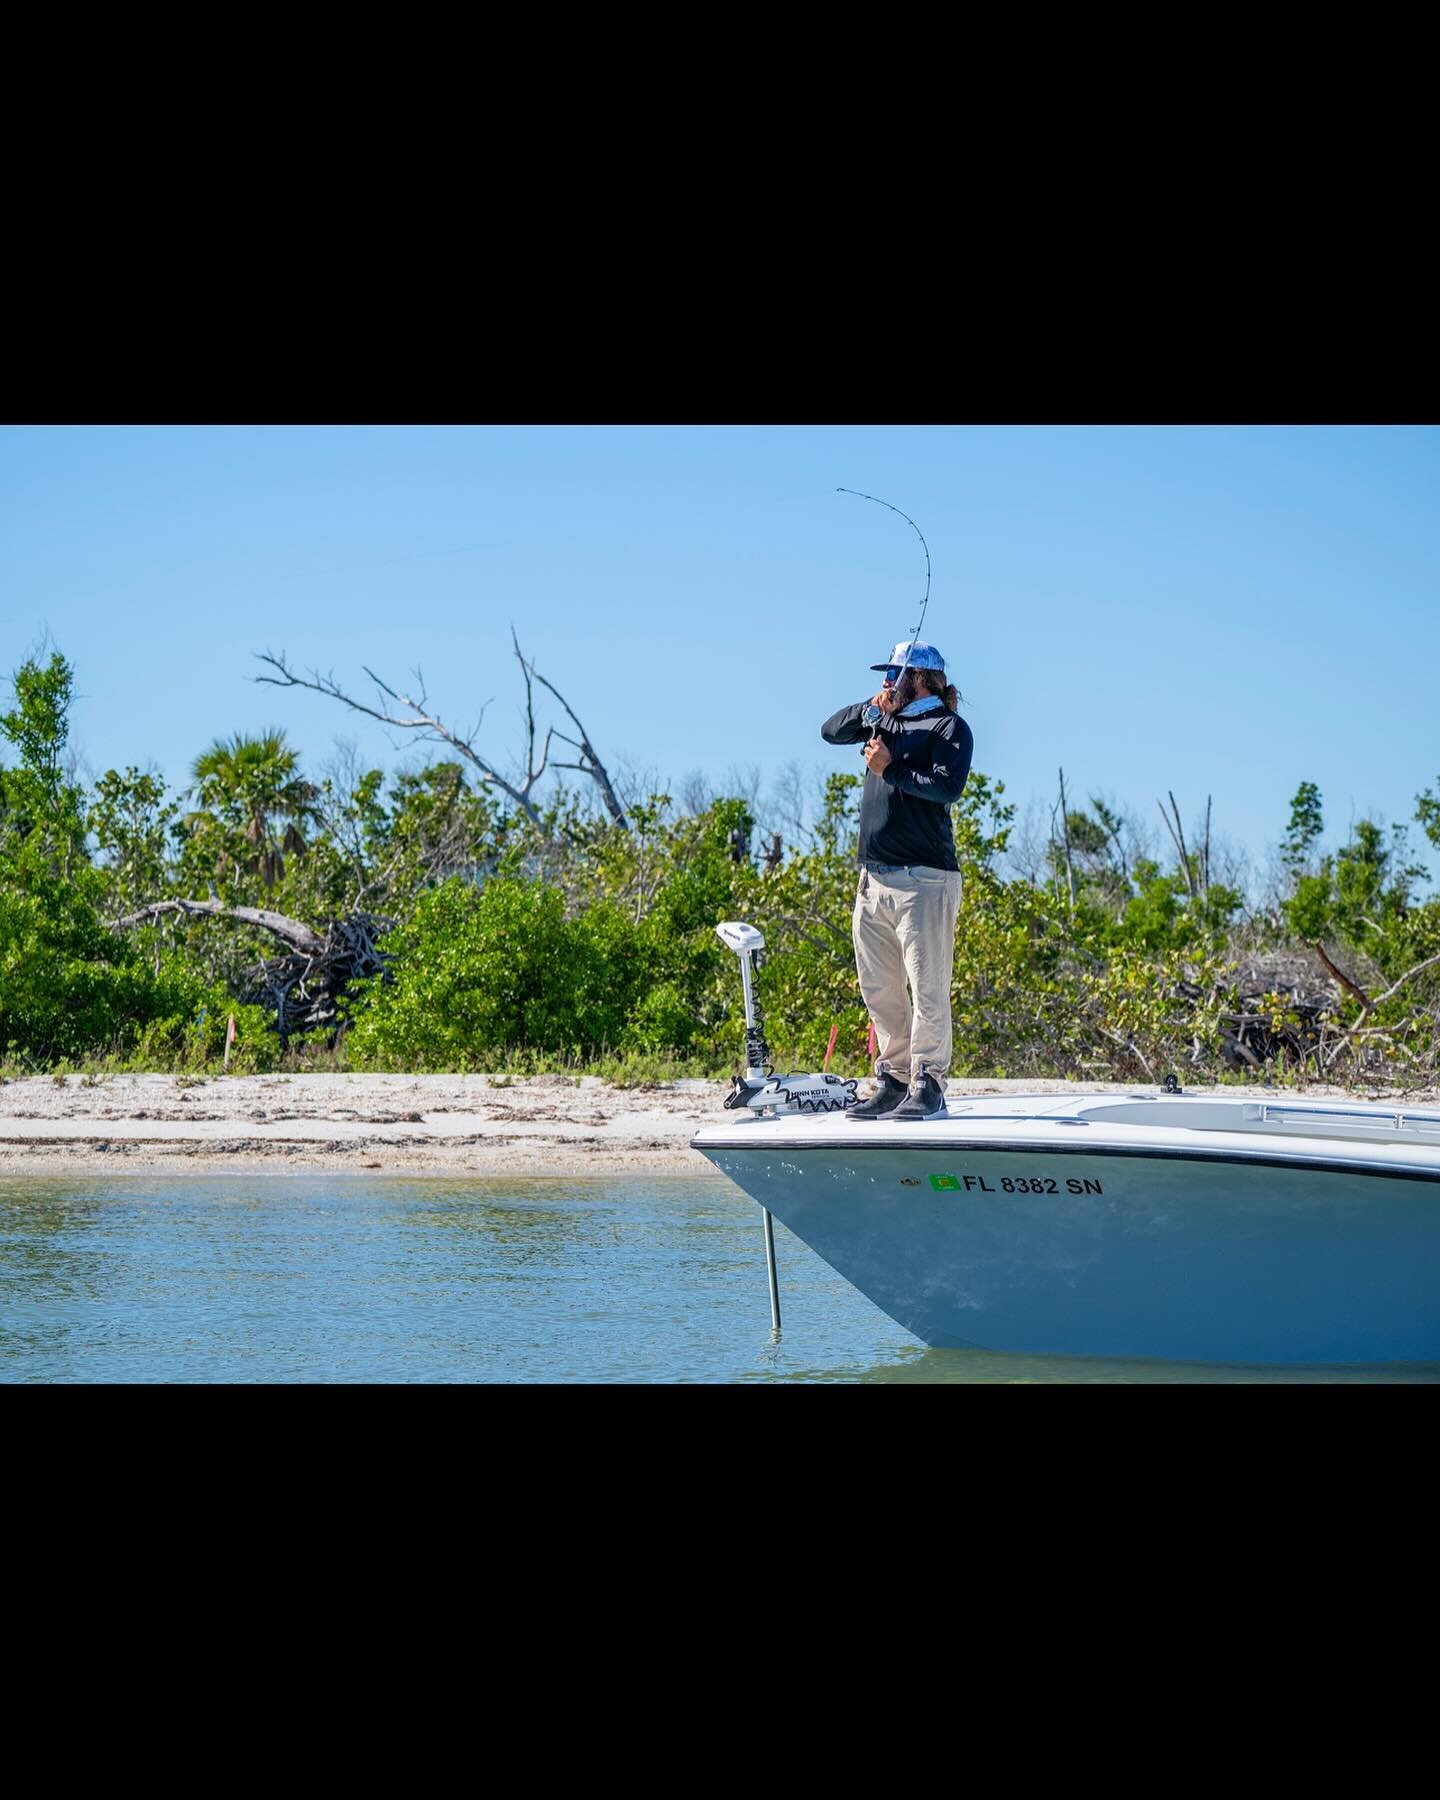 Even on cold windy days there is always something to get the drag screaming out of fort Myers beach 🏝️ 

➡️Swipe to see what&rsquo;s biting today with @lifeonthewatertv 

@scales_gear 
@costacustomboats 
@pinkshellresort 

#fishing #fortmyersbeach #